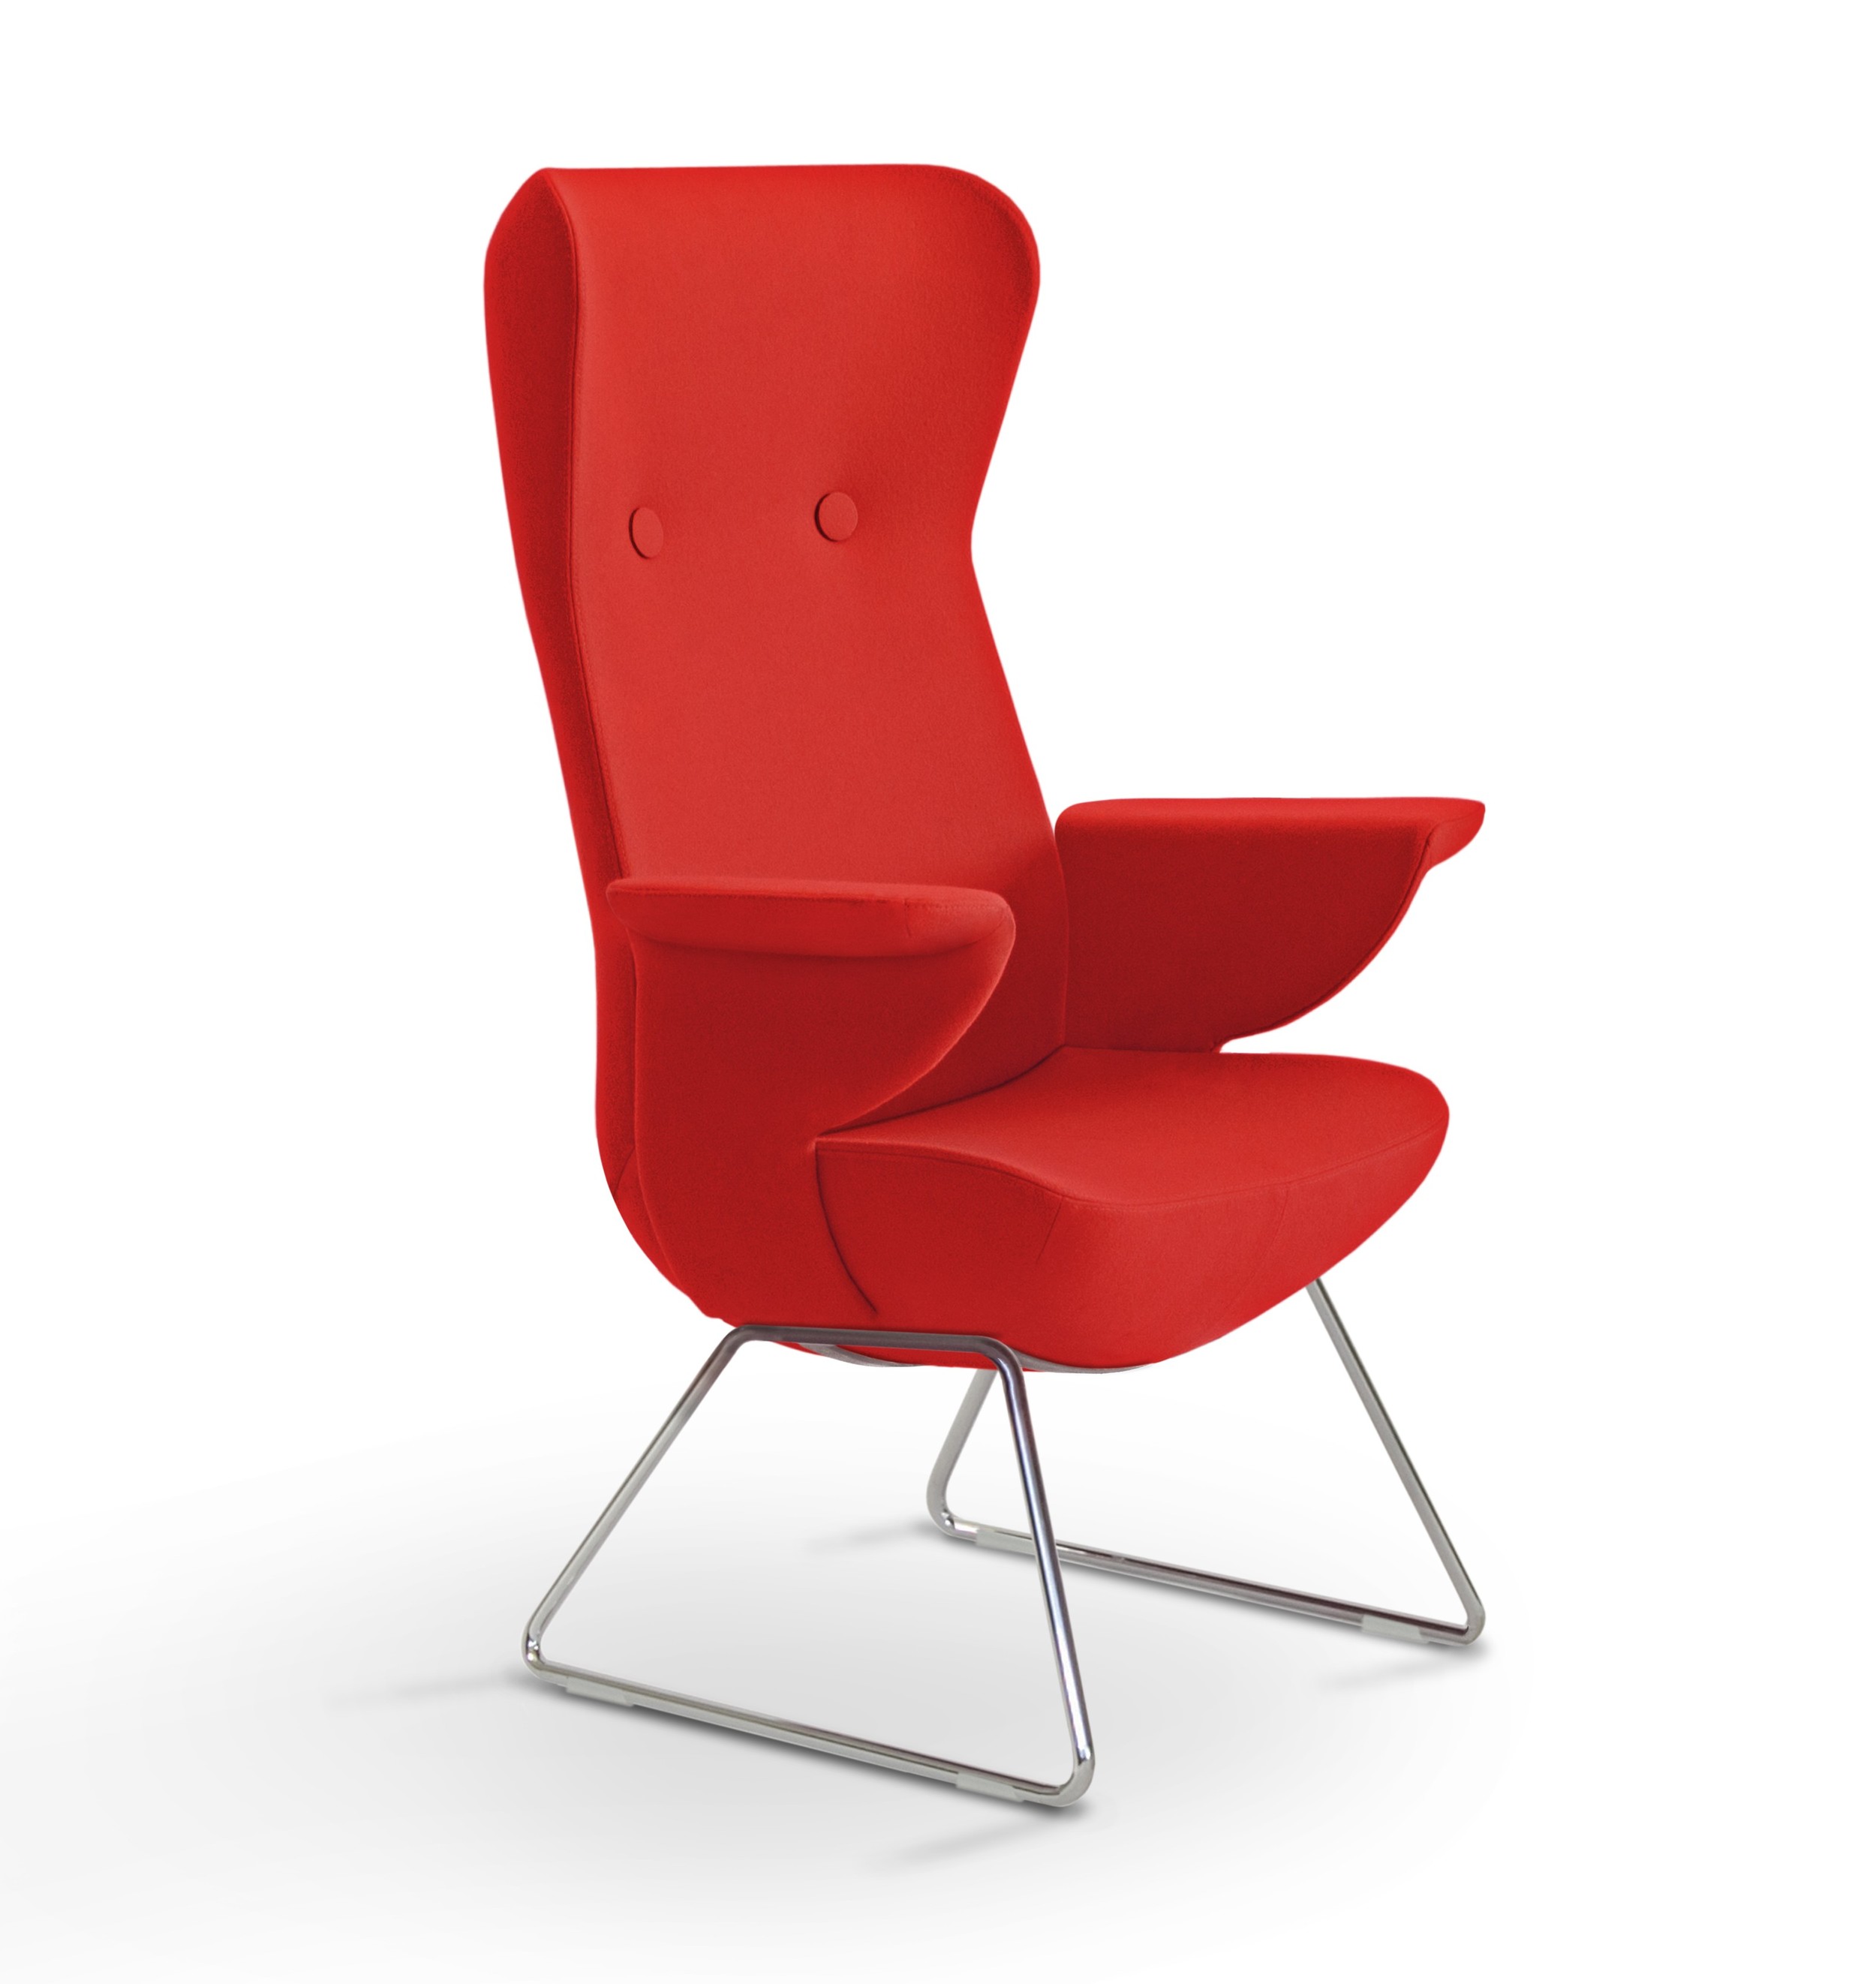 Edith Chair by Kenneth Grange for Hitch Mylius 04.jpg